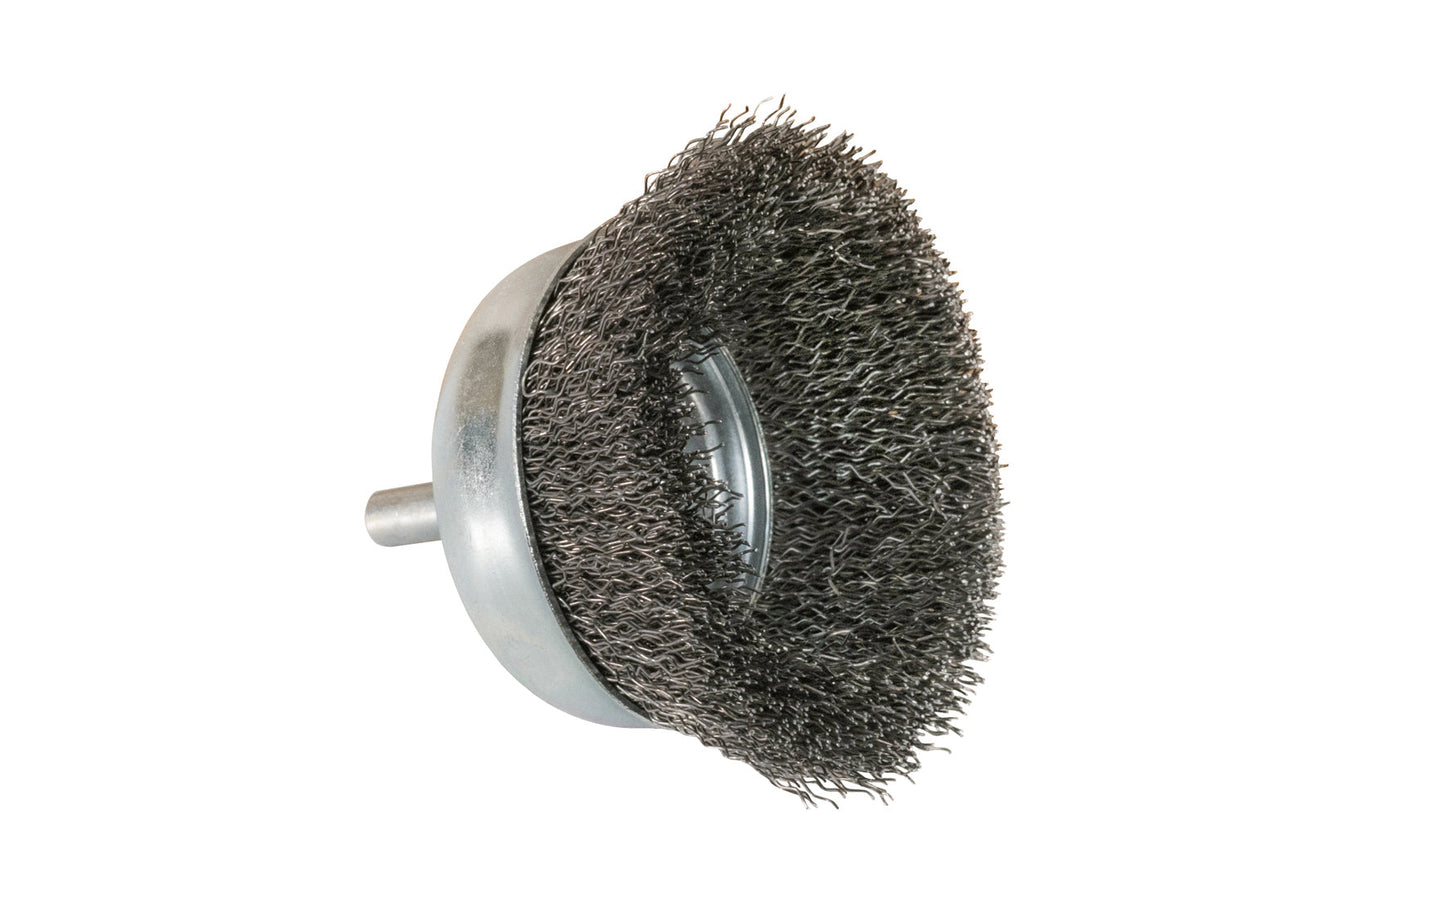 Alfa Tools 2" Coarse Crimped Wire Cup Brush - 1/4" Shank. 0.012" Wire Diameter. 5000 RPM max. All-steel construction. Applications include deburring, blending, removal of rust, scale, dirt, & finish preparation prior to painting or plating.   Made by Alfa Tools.   Made in Spain. 